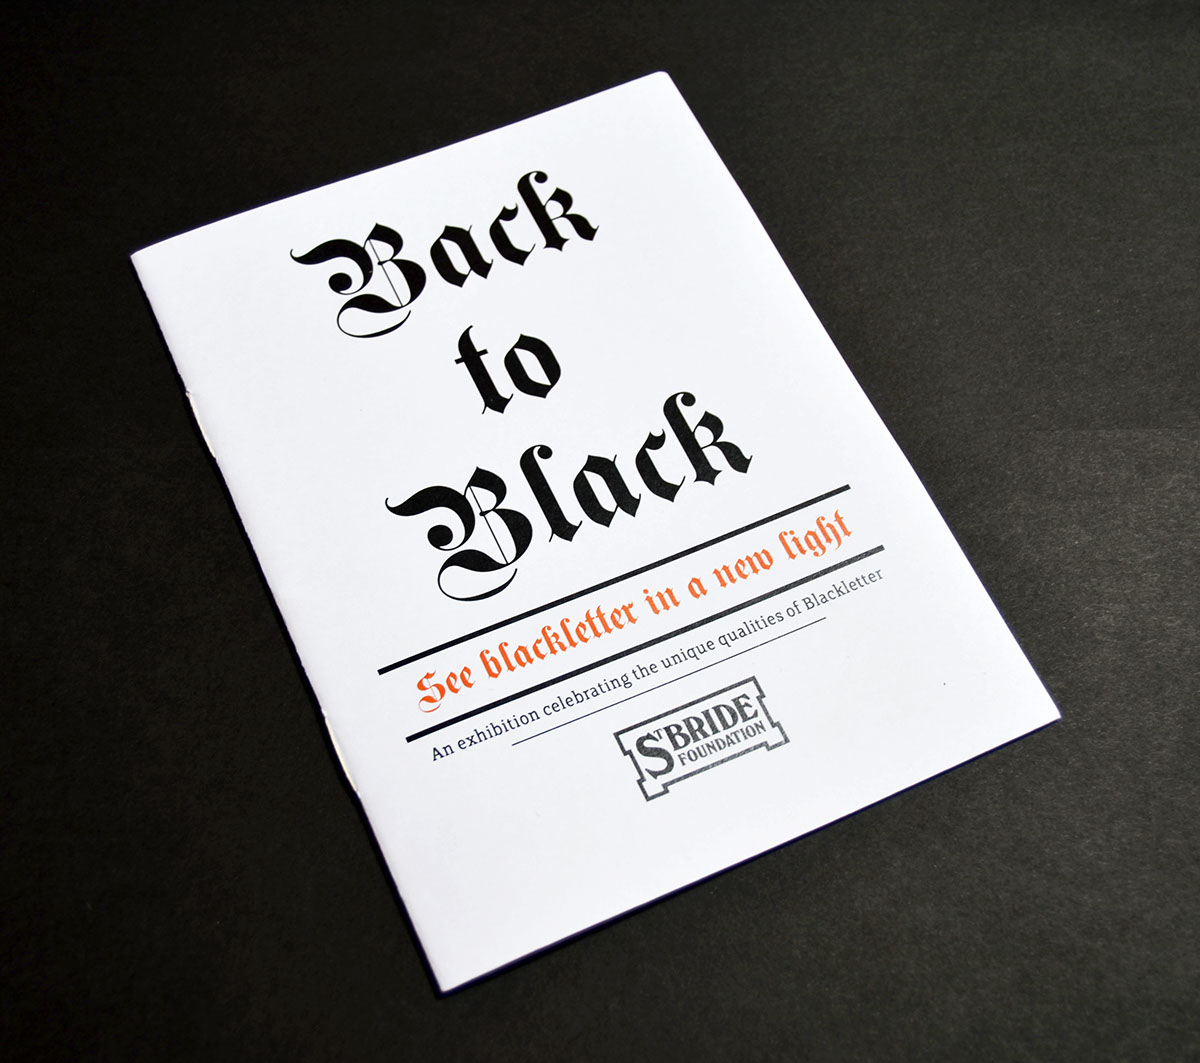 Blackletter editorial exhibition promotion